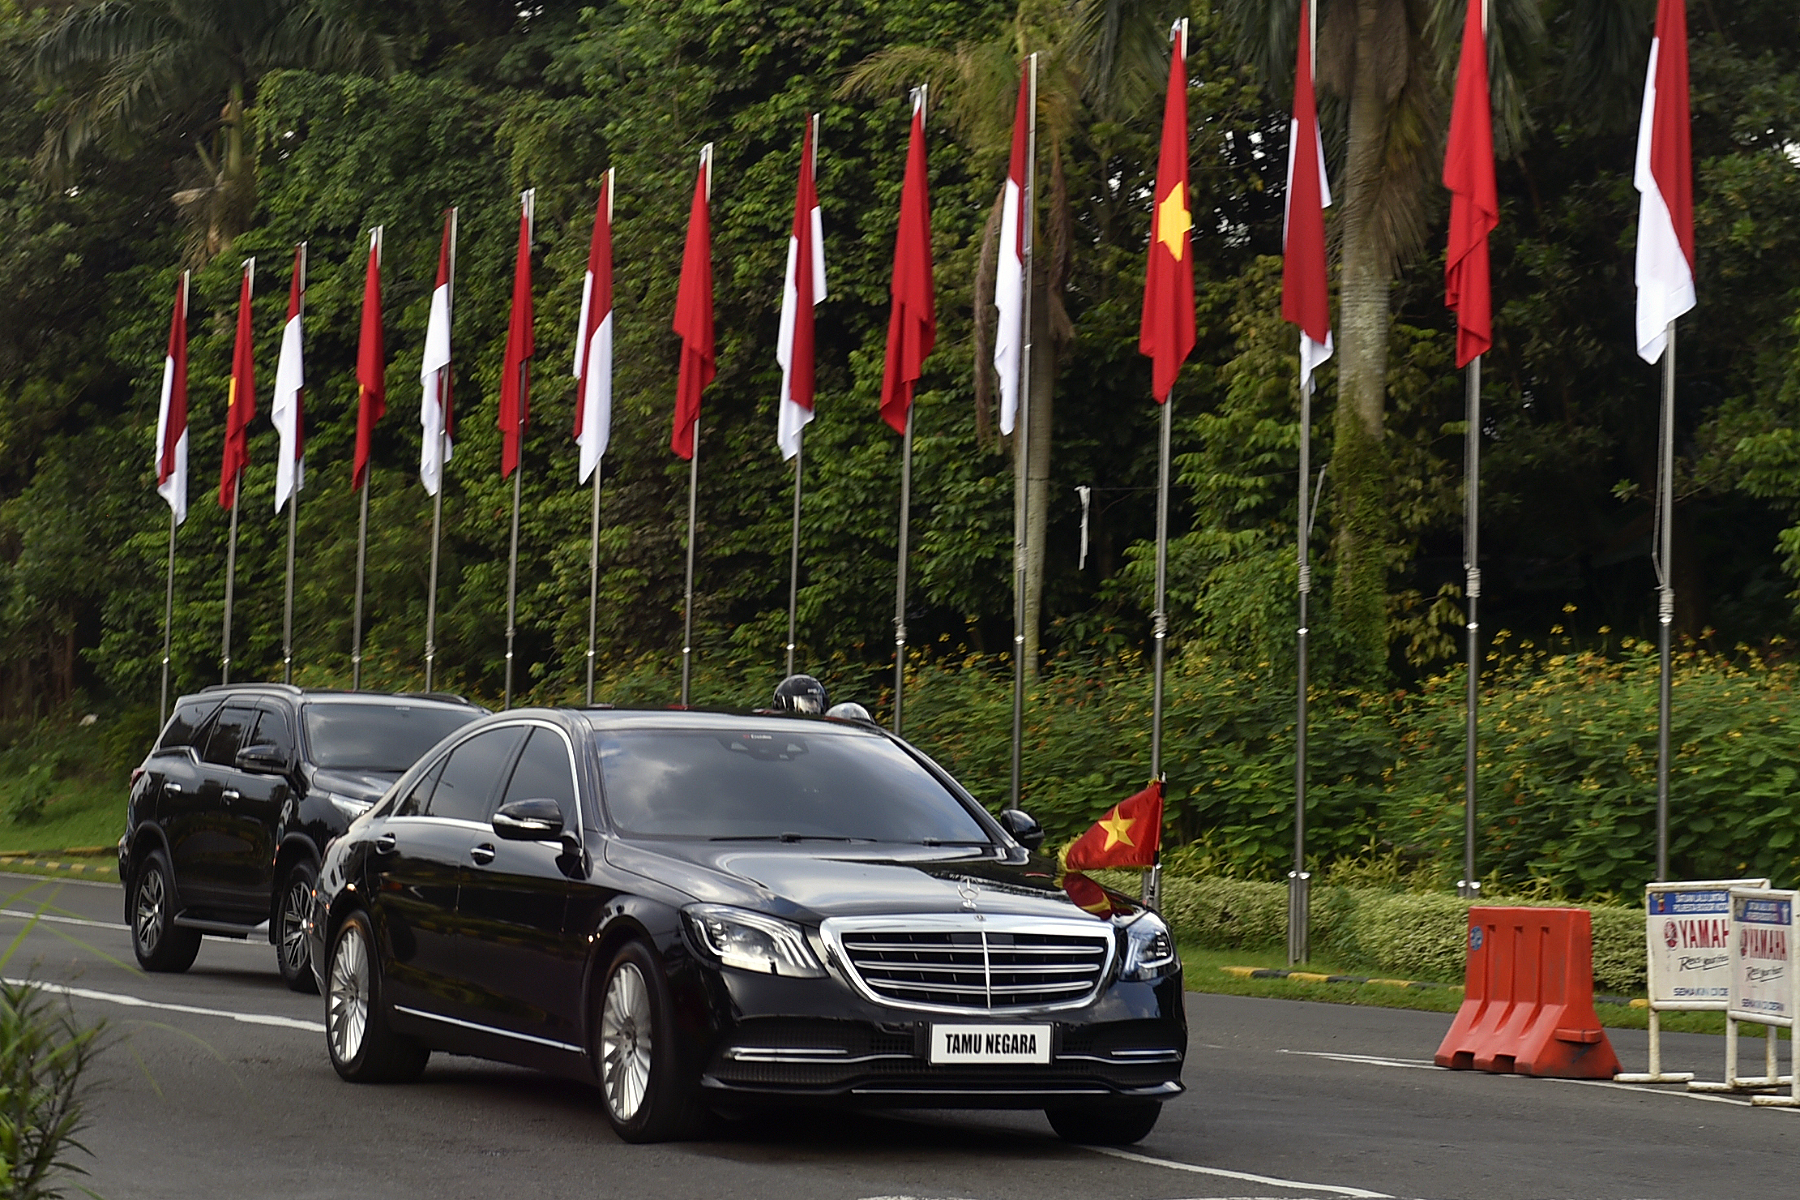 Vietnamese Prime Minister Holds Talks With Indonesian President Ahead of Regional Leaders’ Meeting